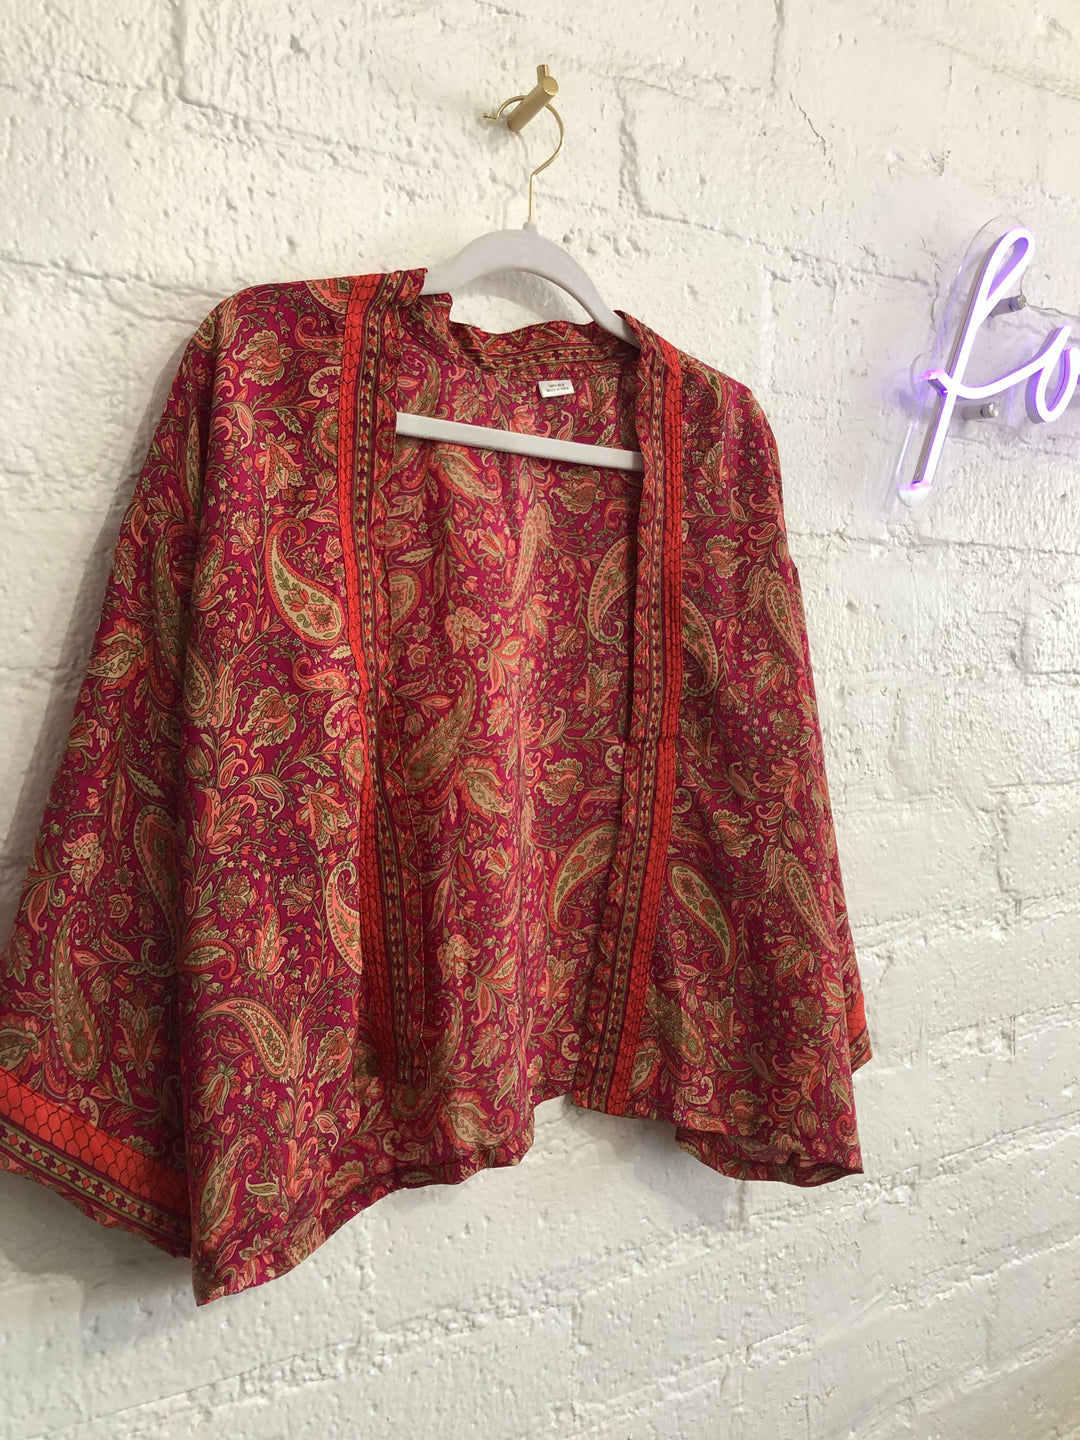 Weeping Willow Textiles- 100% Silk Light and Airy Kimono jackets